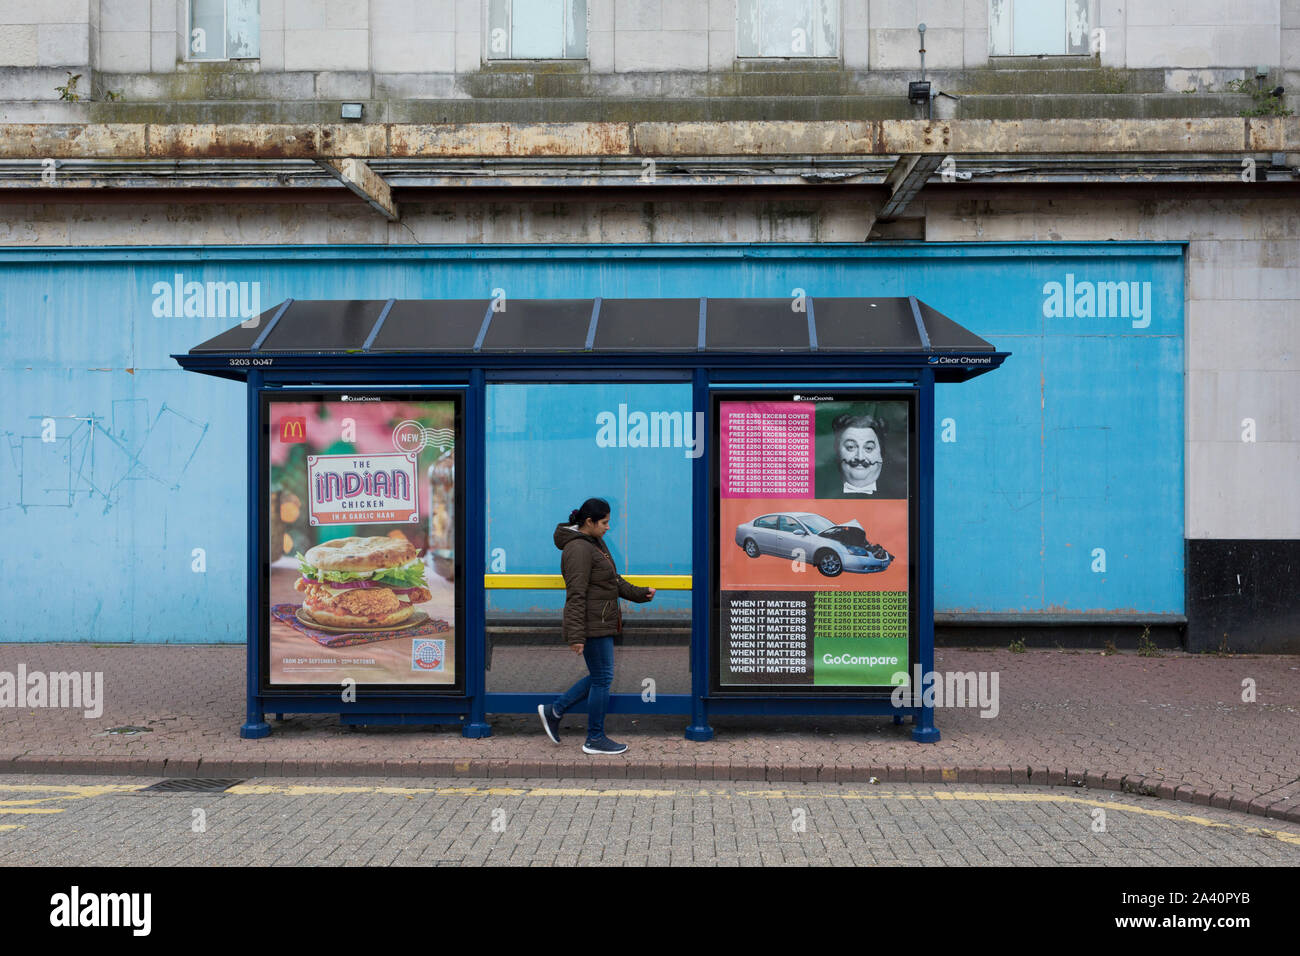 A passer-by walks past a bus shelter featuring Indian food and Go Compare insurance plus a blue hoarding outside a closed entertainment venue in Dartford, on 3rd October 2019, in Dartford, Kent, England. Voters in Dartford voted 64% in favour of Brexit during the 2016 referendum. Stock Photo